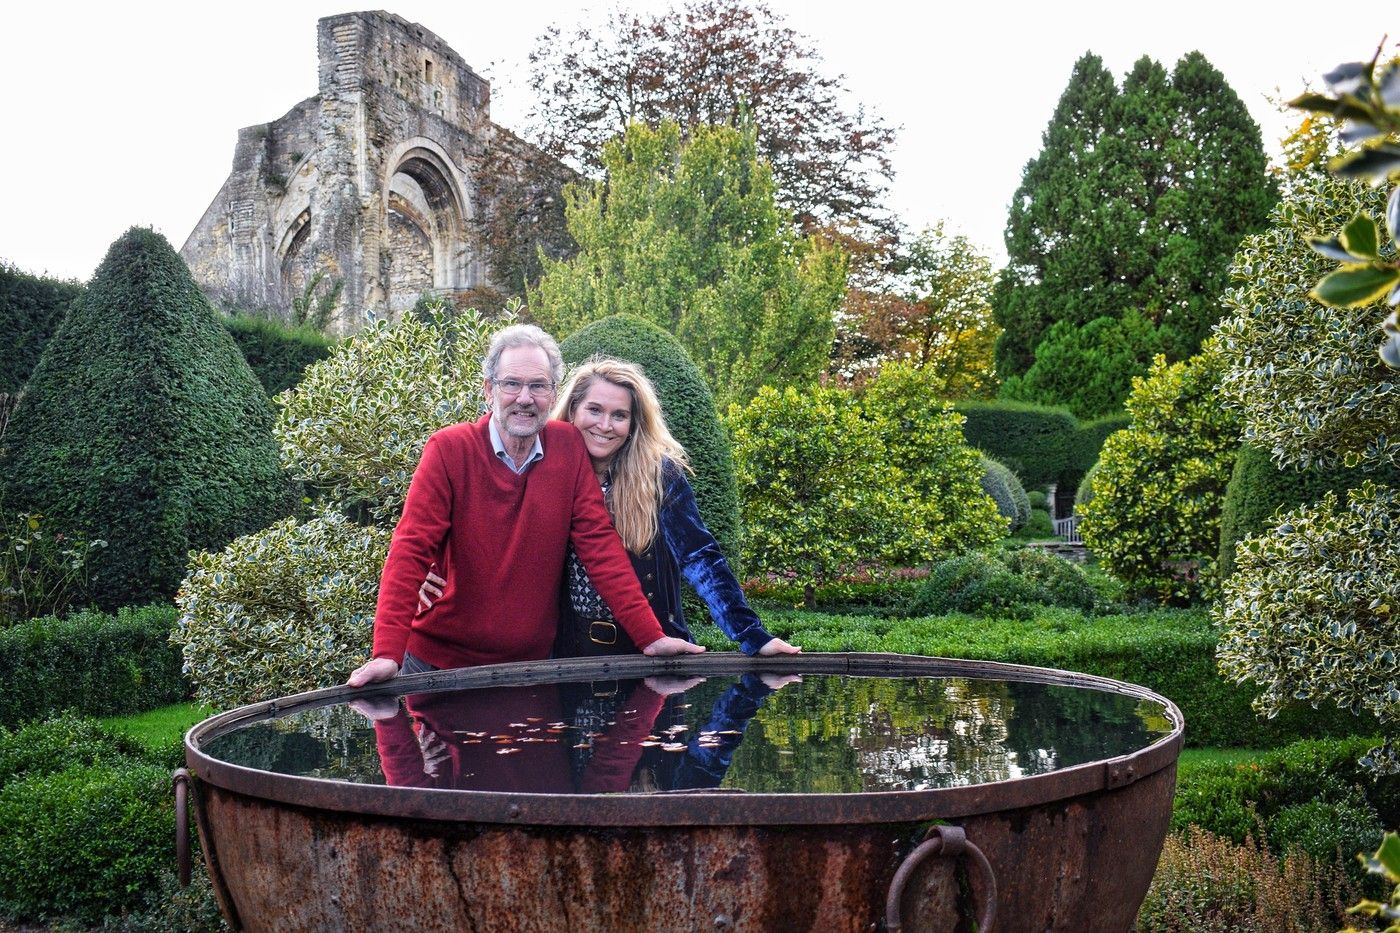 Abbey House Manor gardens in Malmesbury Re-open with Ticket Proceeds to Town Charities 